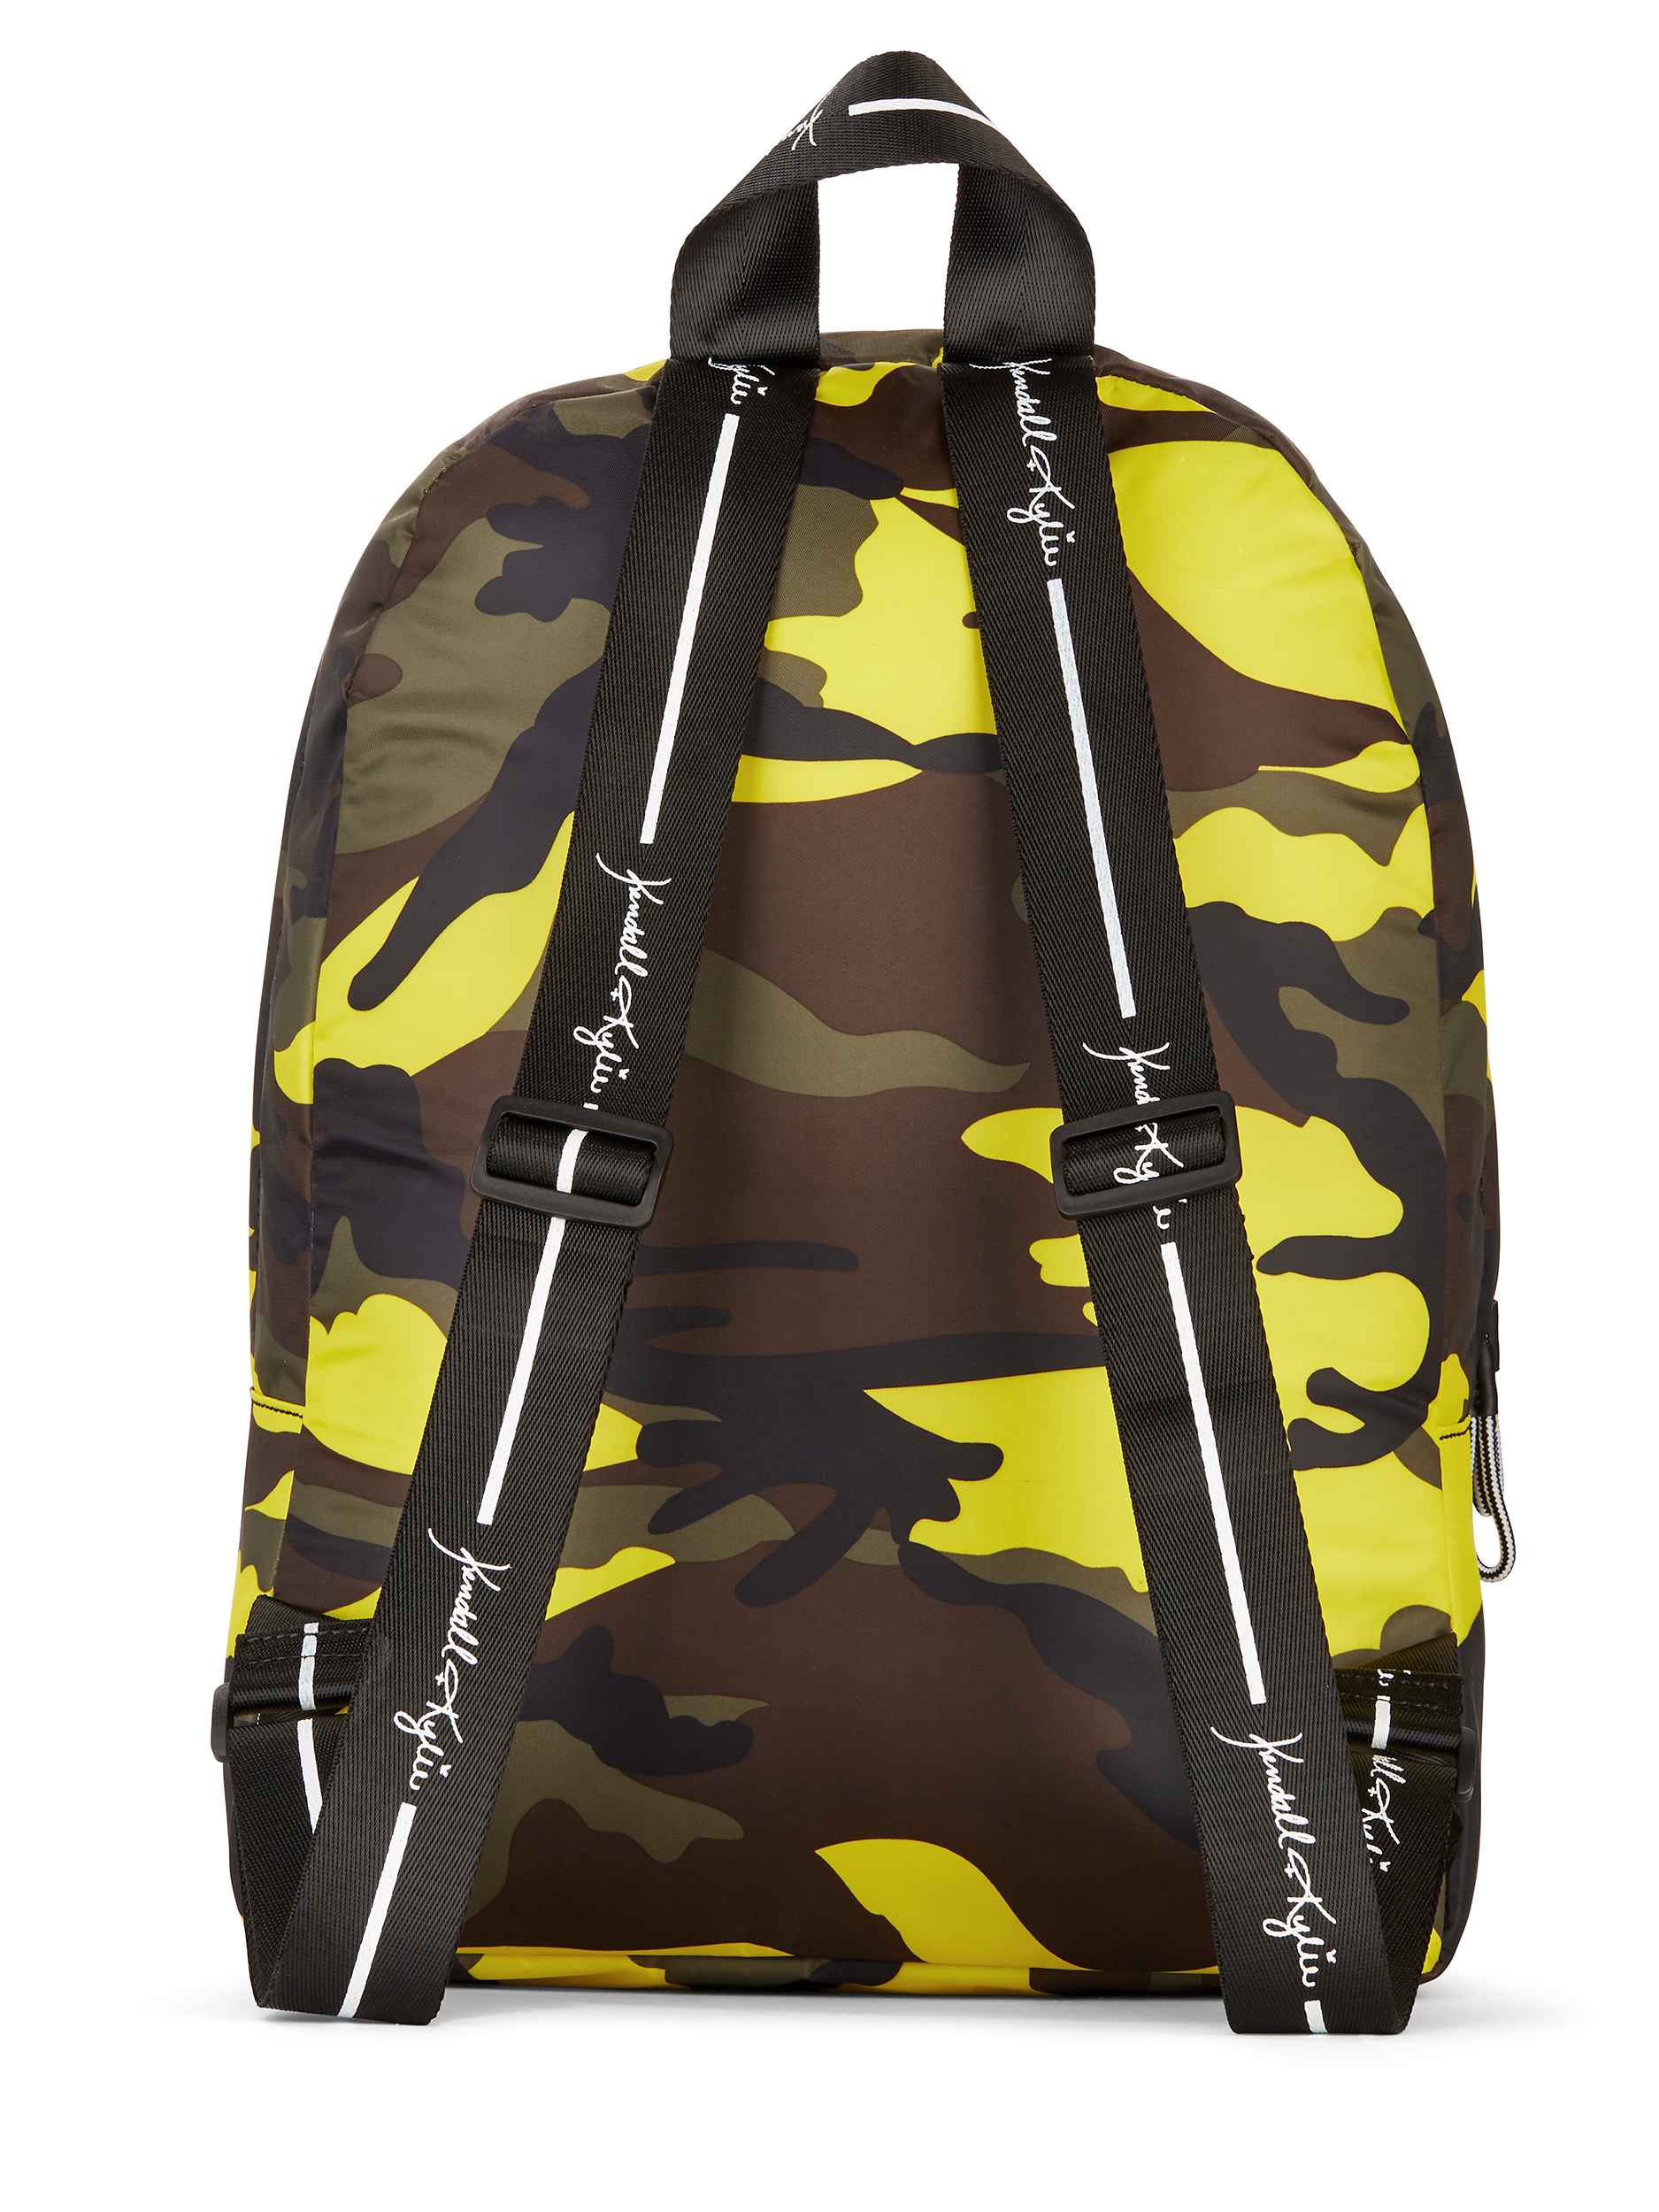 Kendall + Kylie for Walmart Multi Camo Large Backpack - image 5 of 5